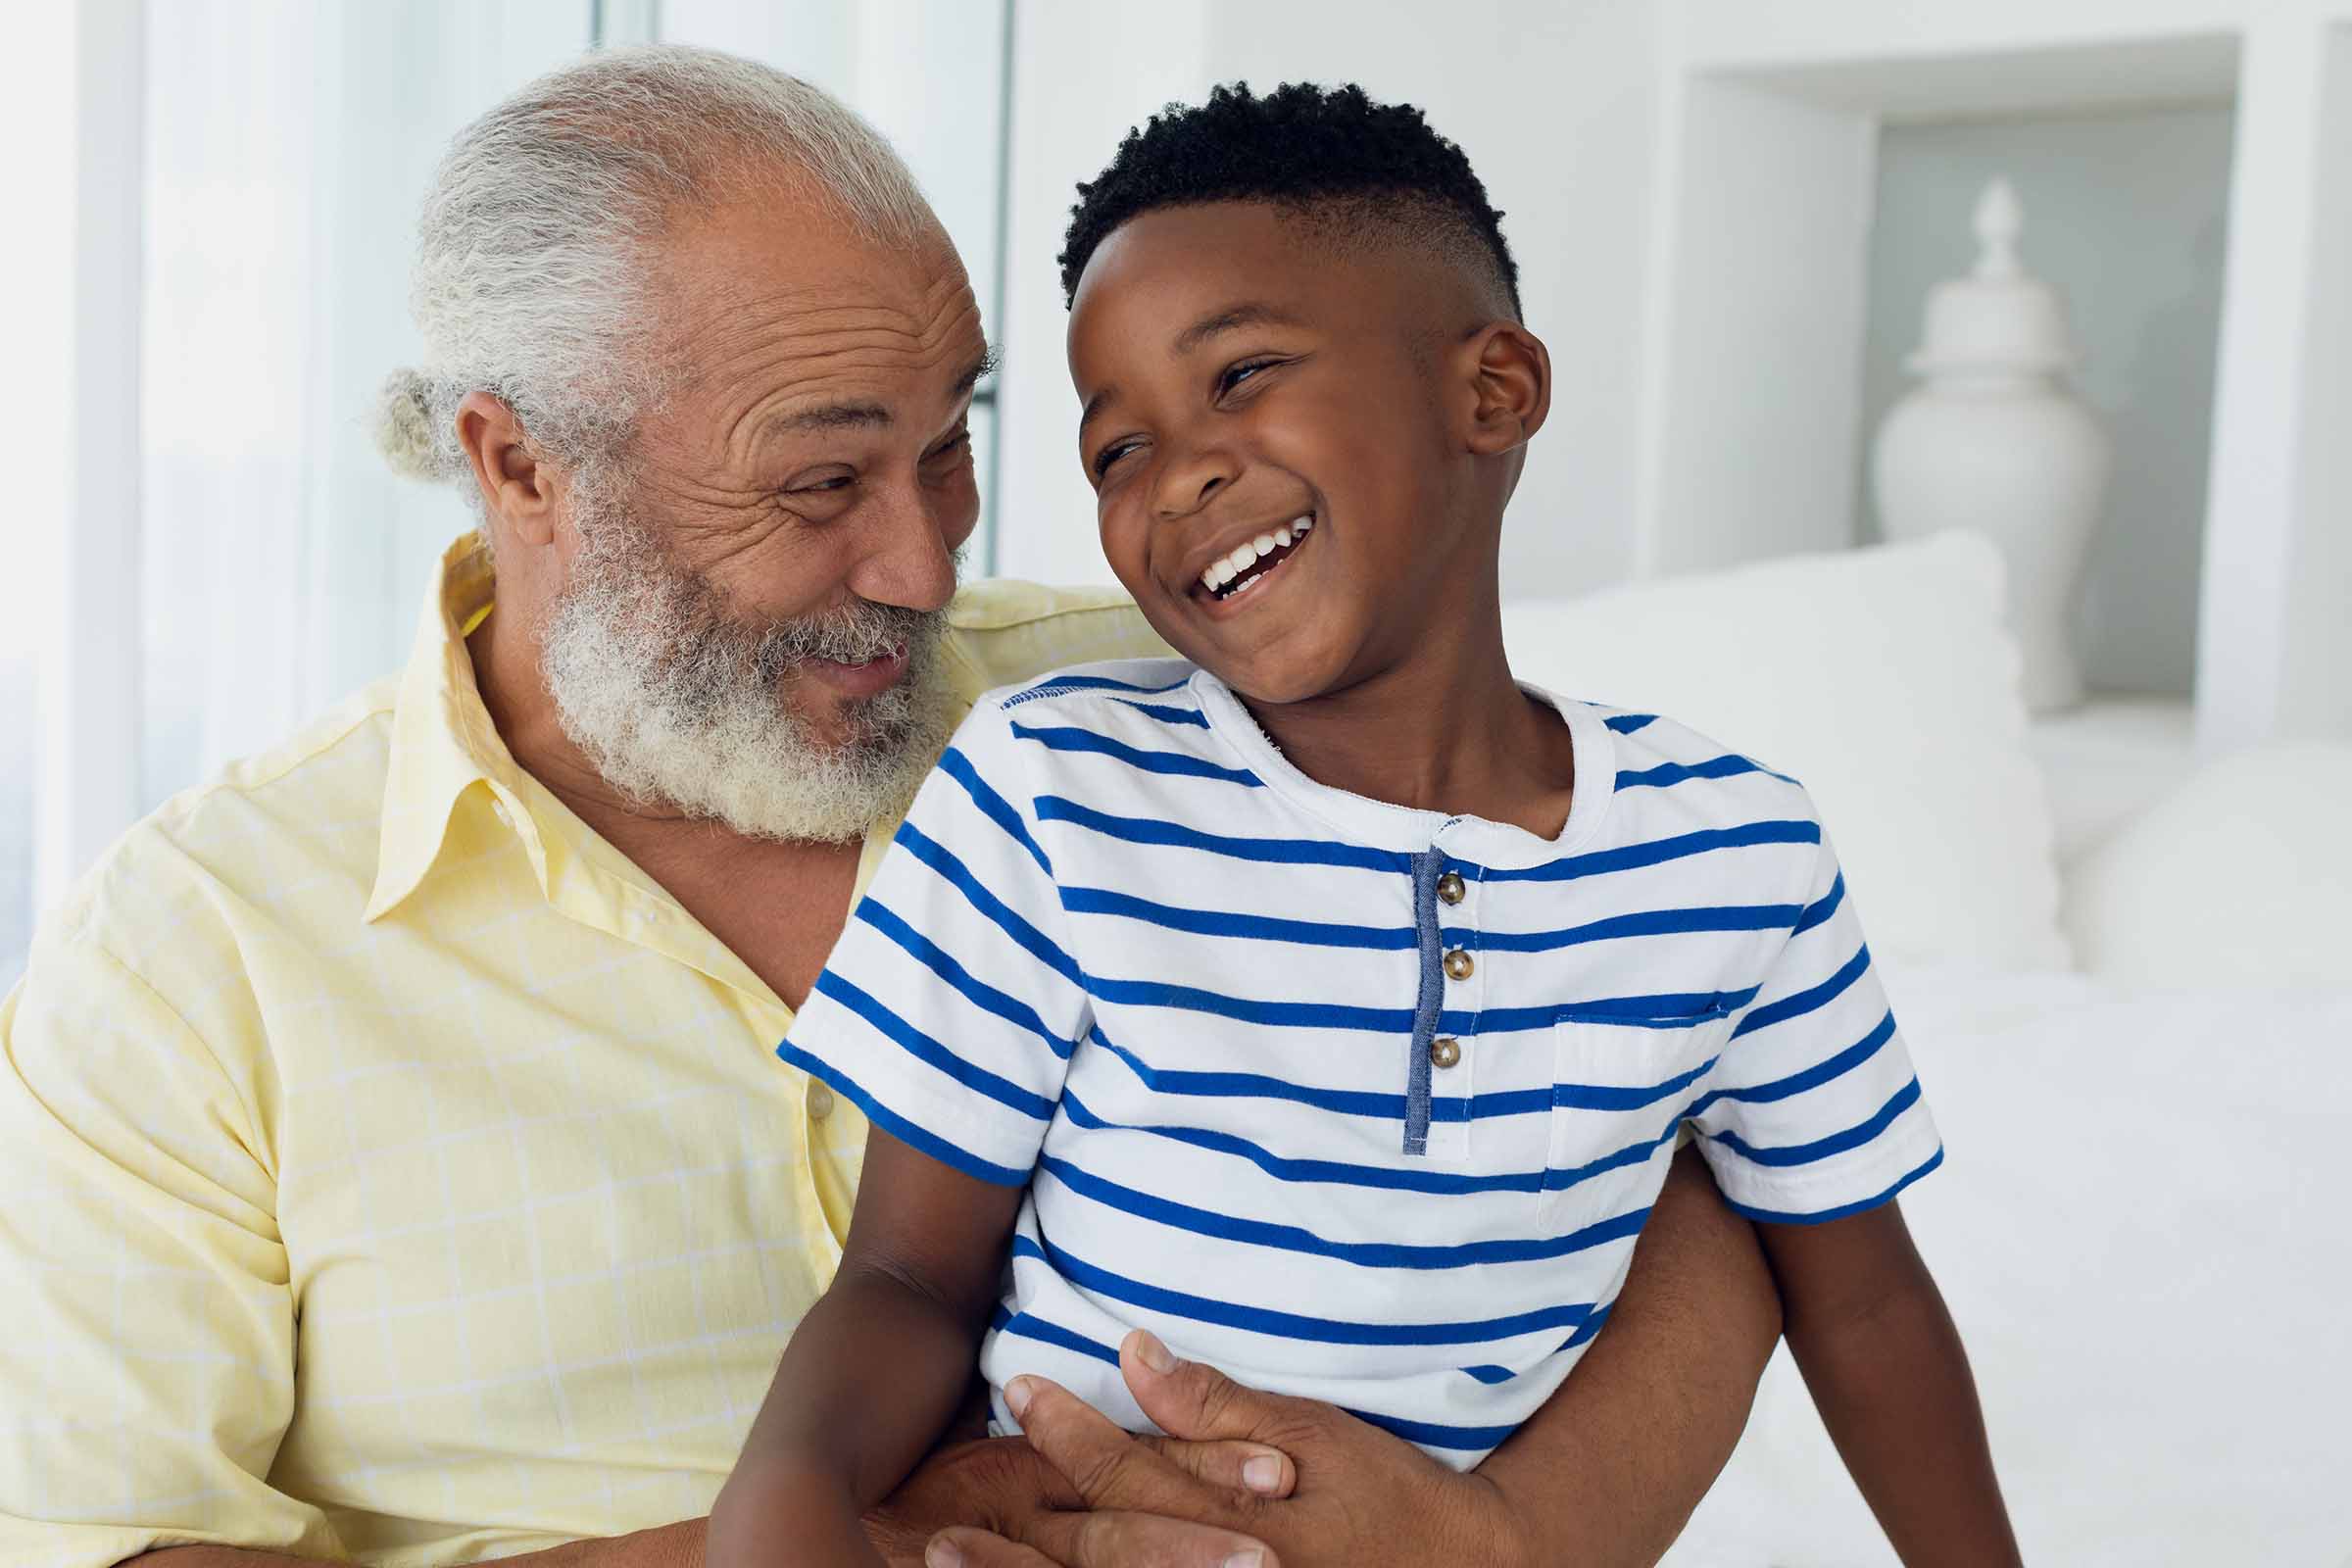 Portrait of African-American child and grandfather smiling together in a room. Authentic Senior Retired Life Concept